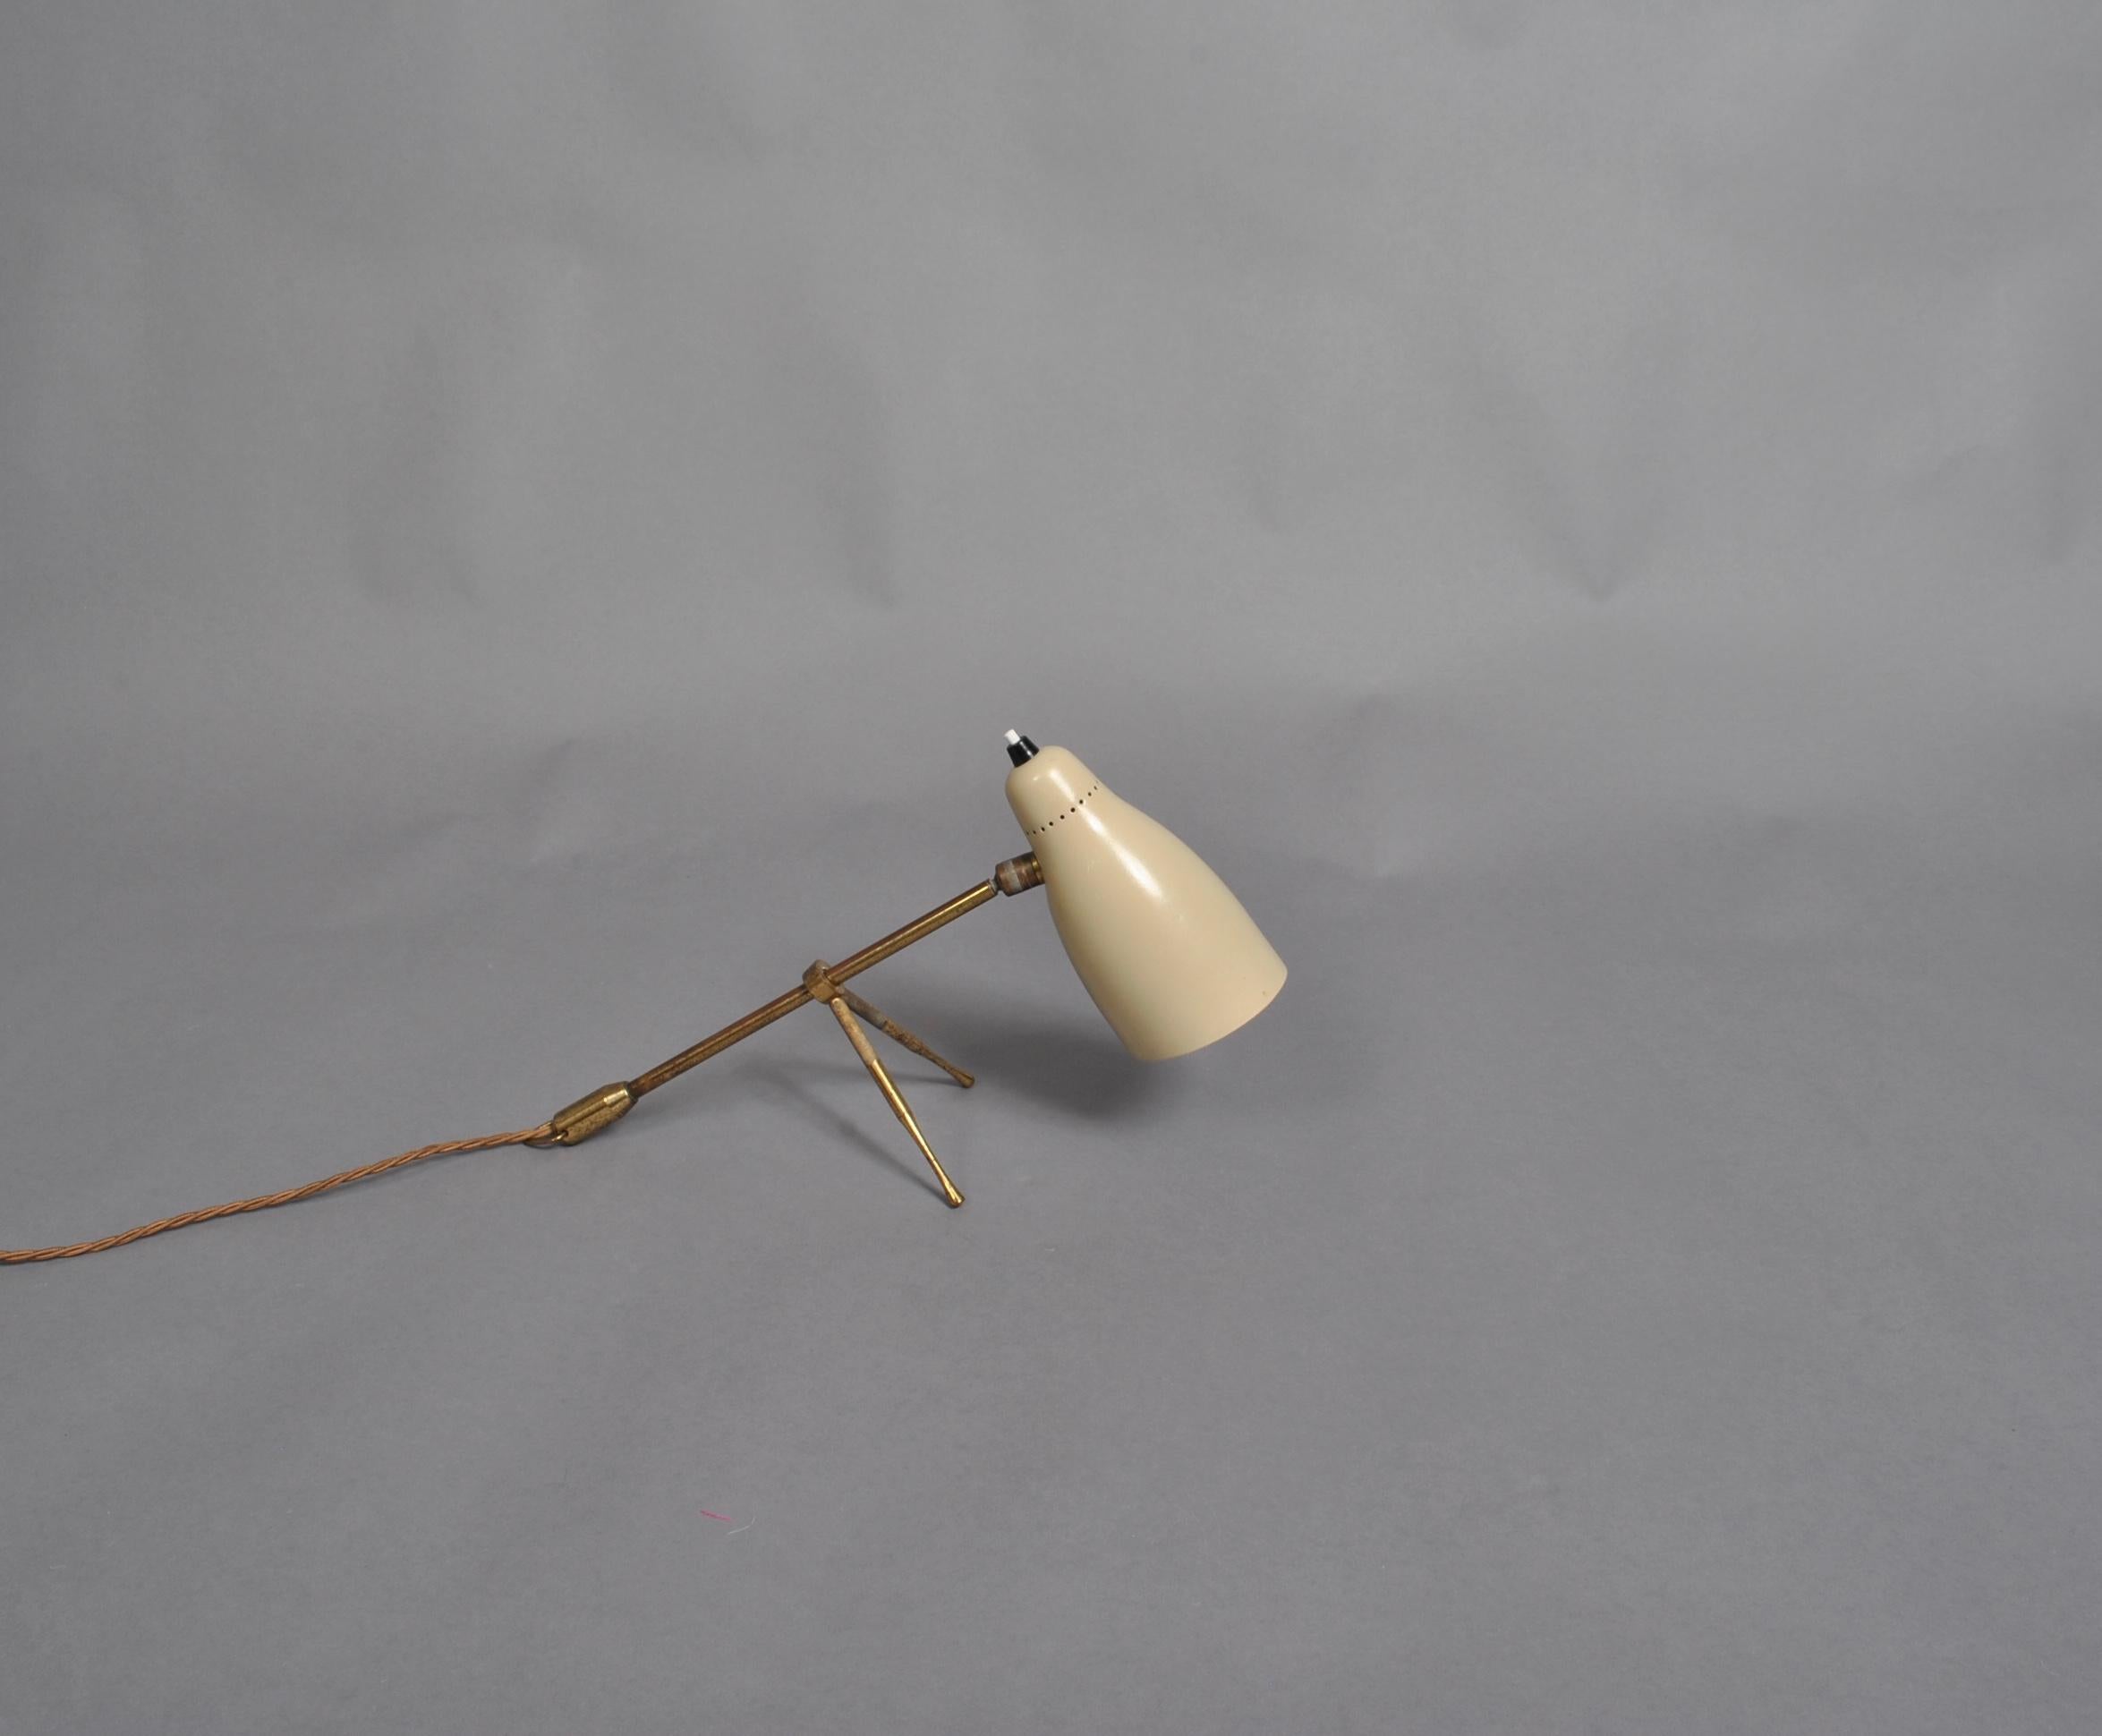 The Ochetta midcentury table or wall lamp by Guiseppe Ostuni for O-Luce, Milan, Italy, 1950s
Sand color shade on brass stem and legs. Adjustable head.

Newly rewired.